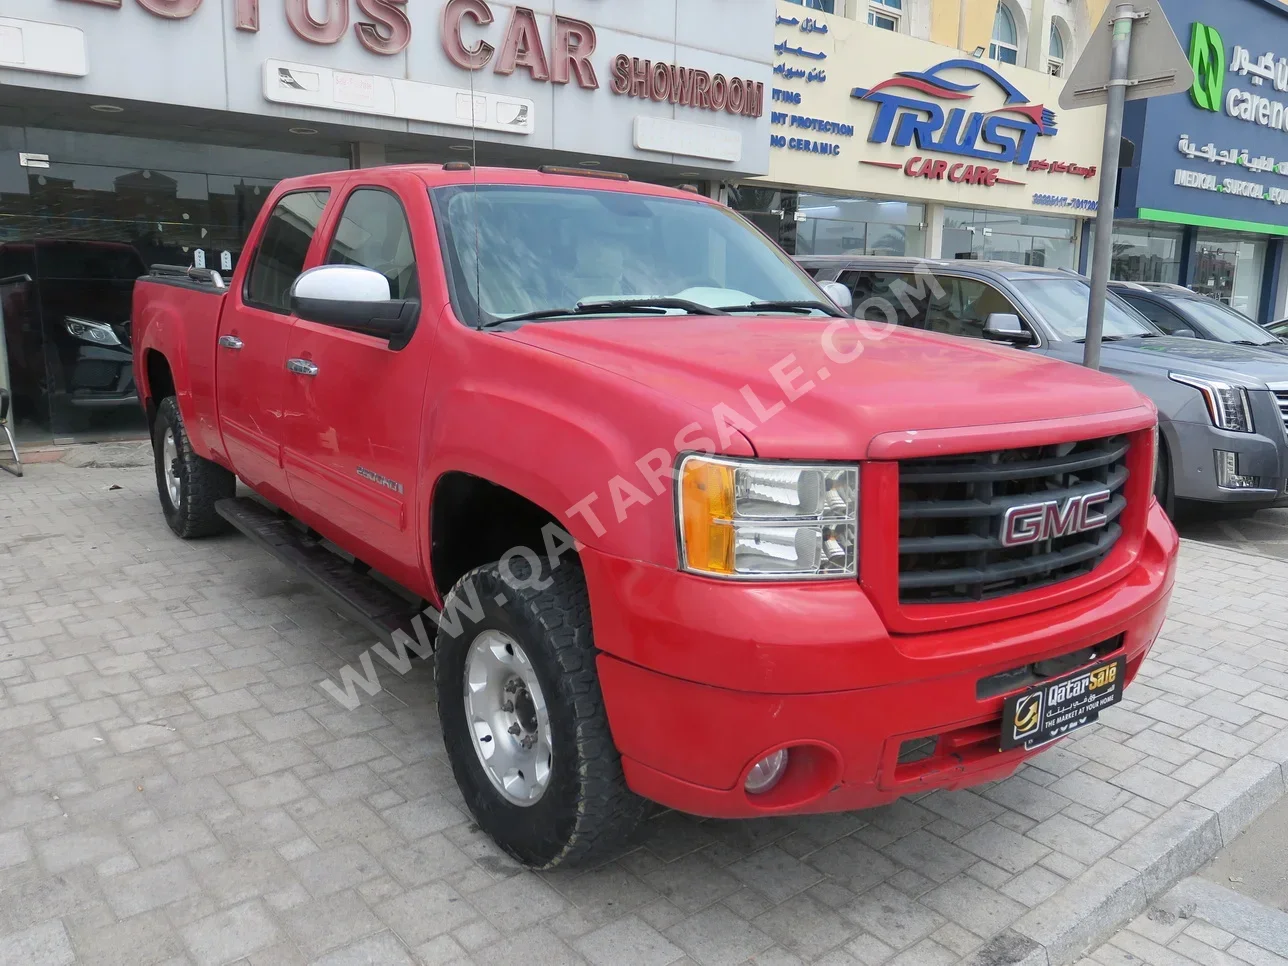 GMC  Sierra  2500 HD  2008  Automatic  290,000 Km  8 Cylinder  Four Wheel Drive (4WD)  Pick Up  Red